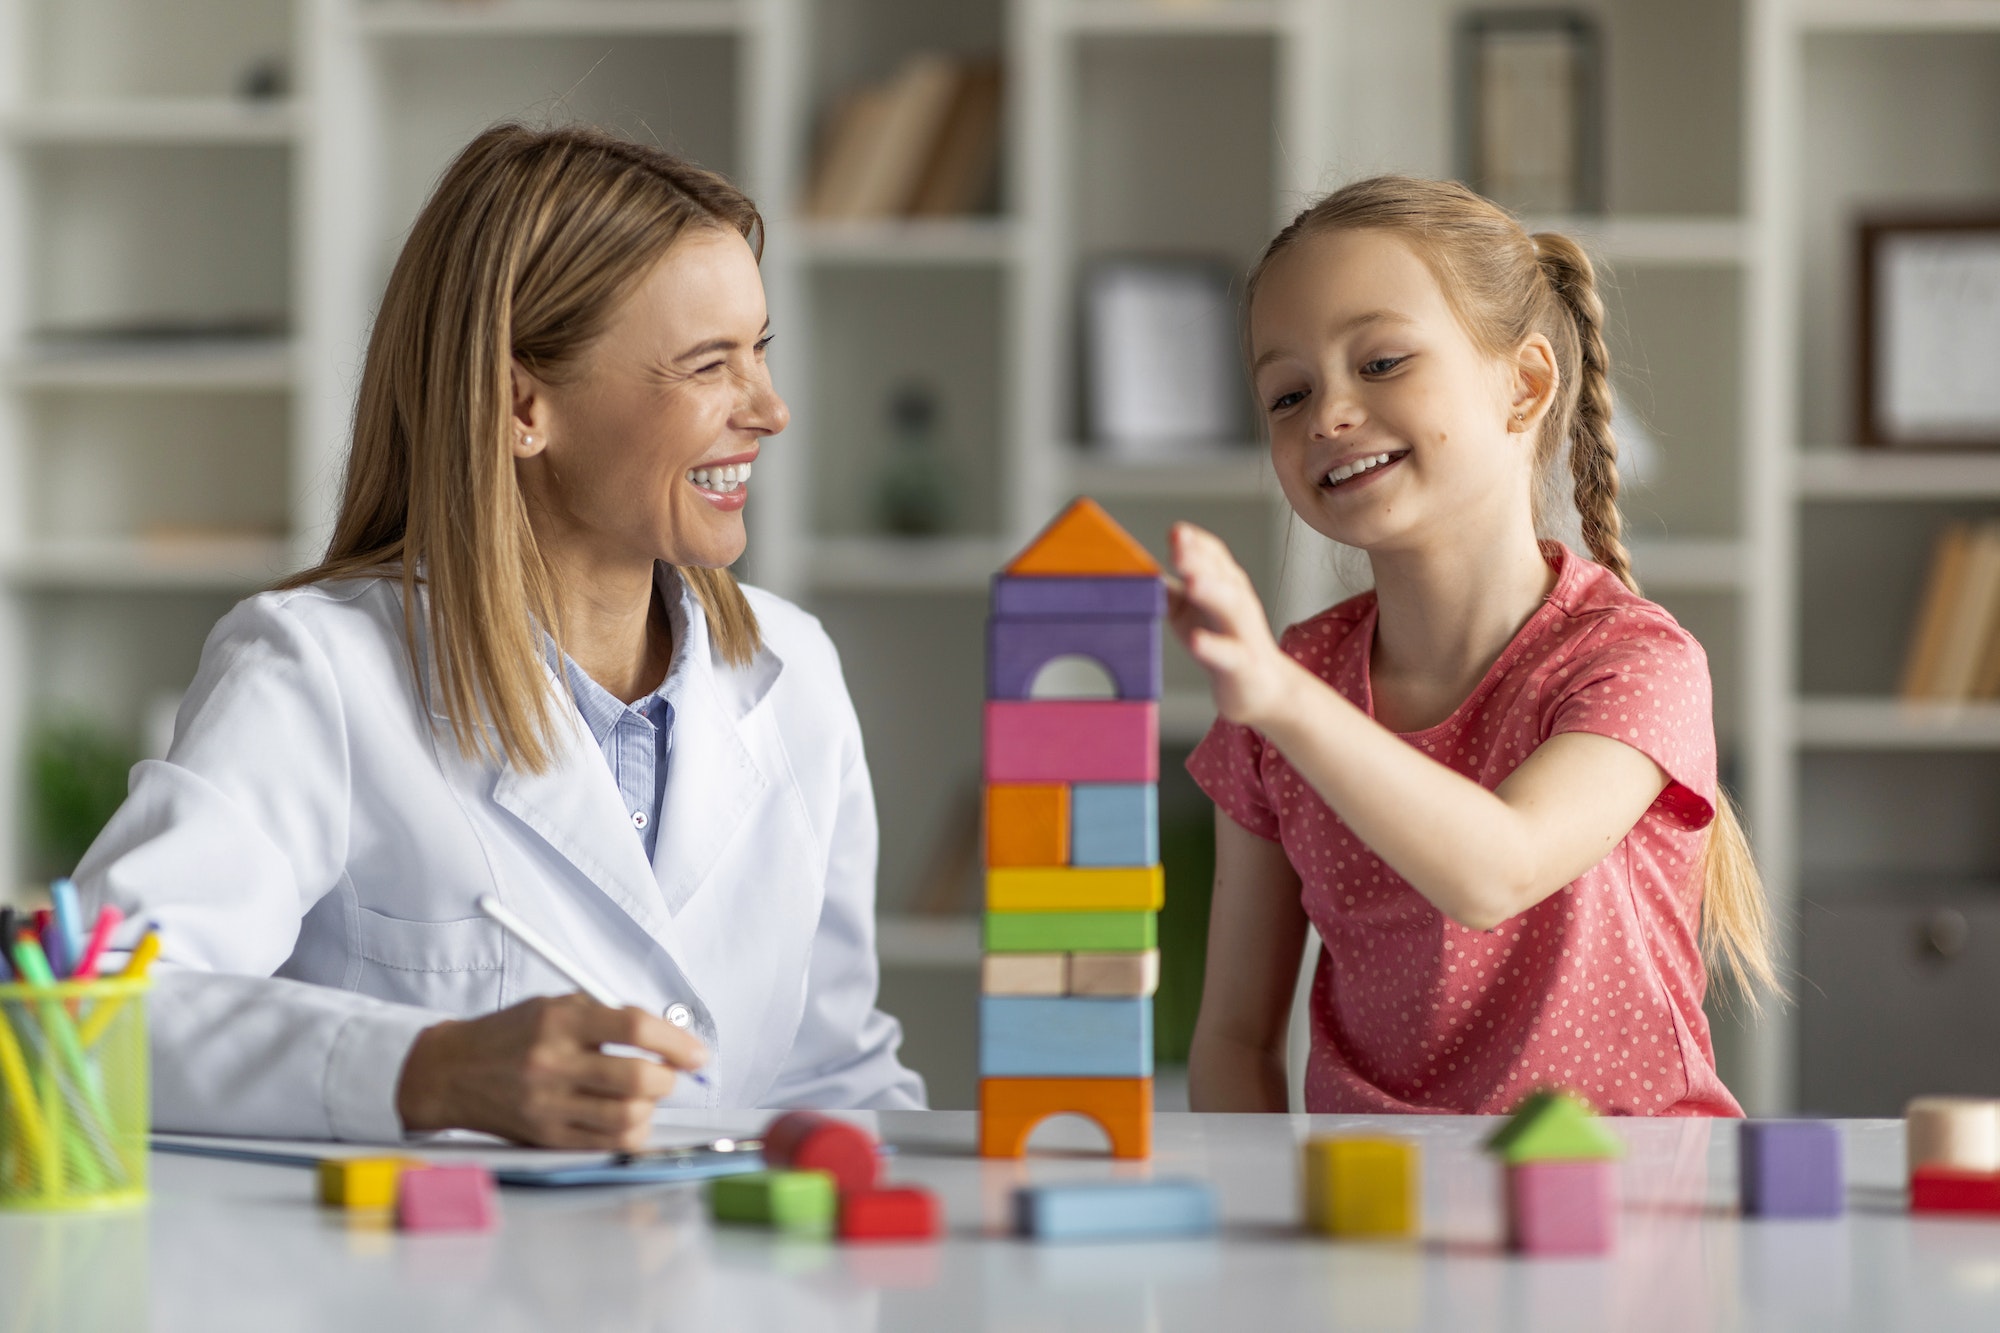 Child Development Specialist Looking At Little Girl Playing With Colorful Wooden Bricks